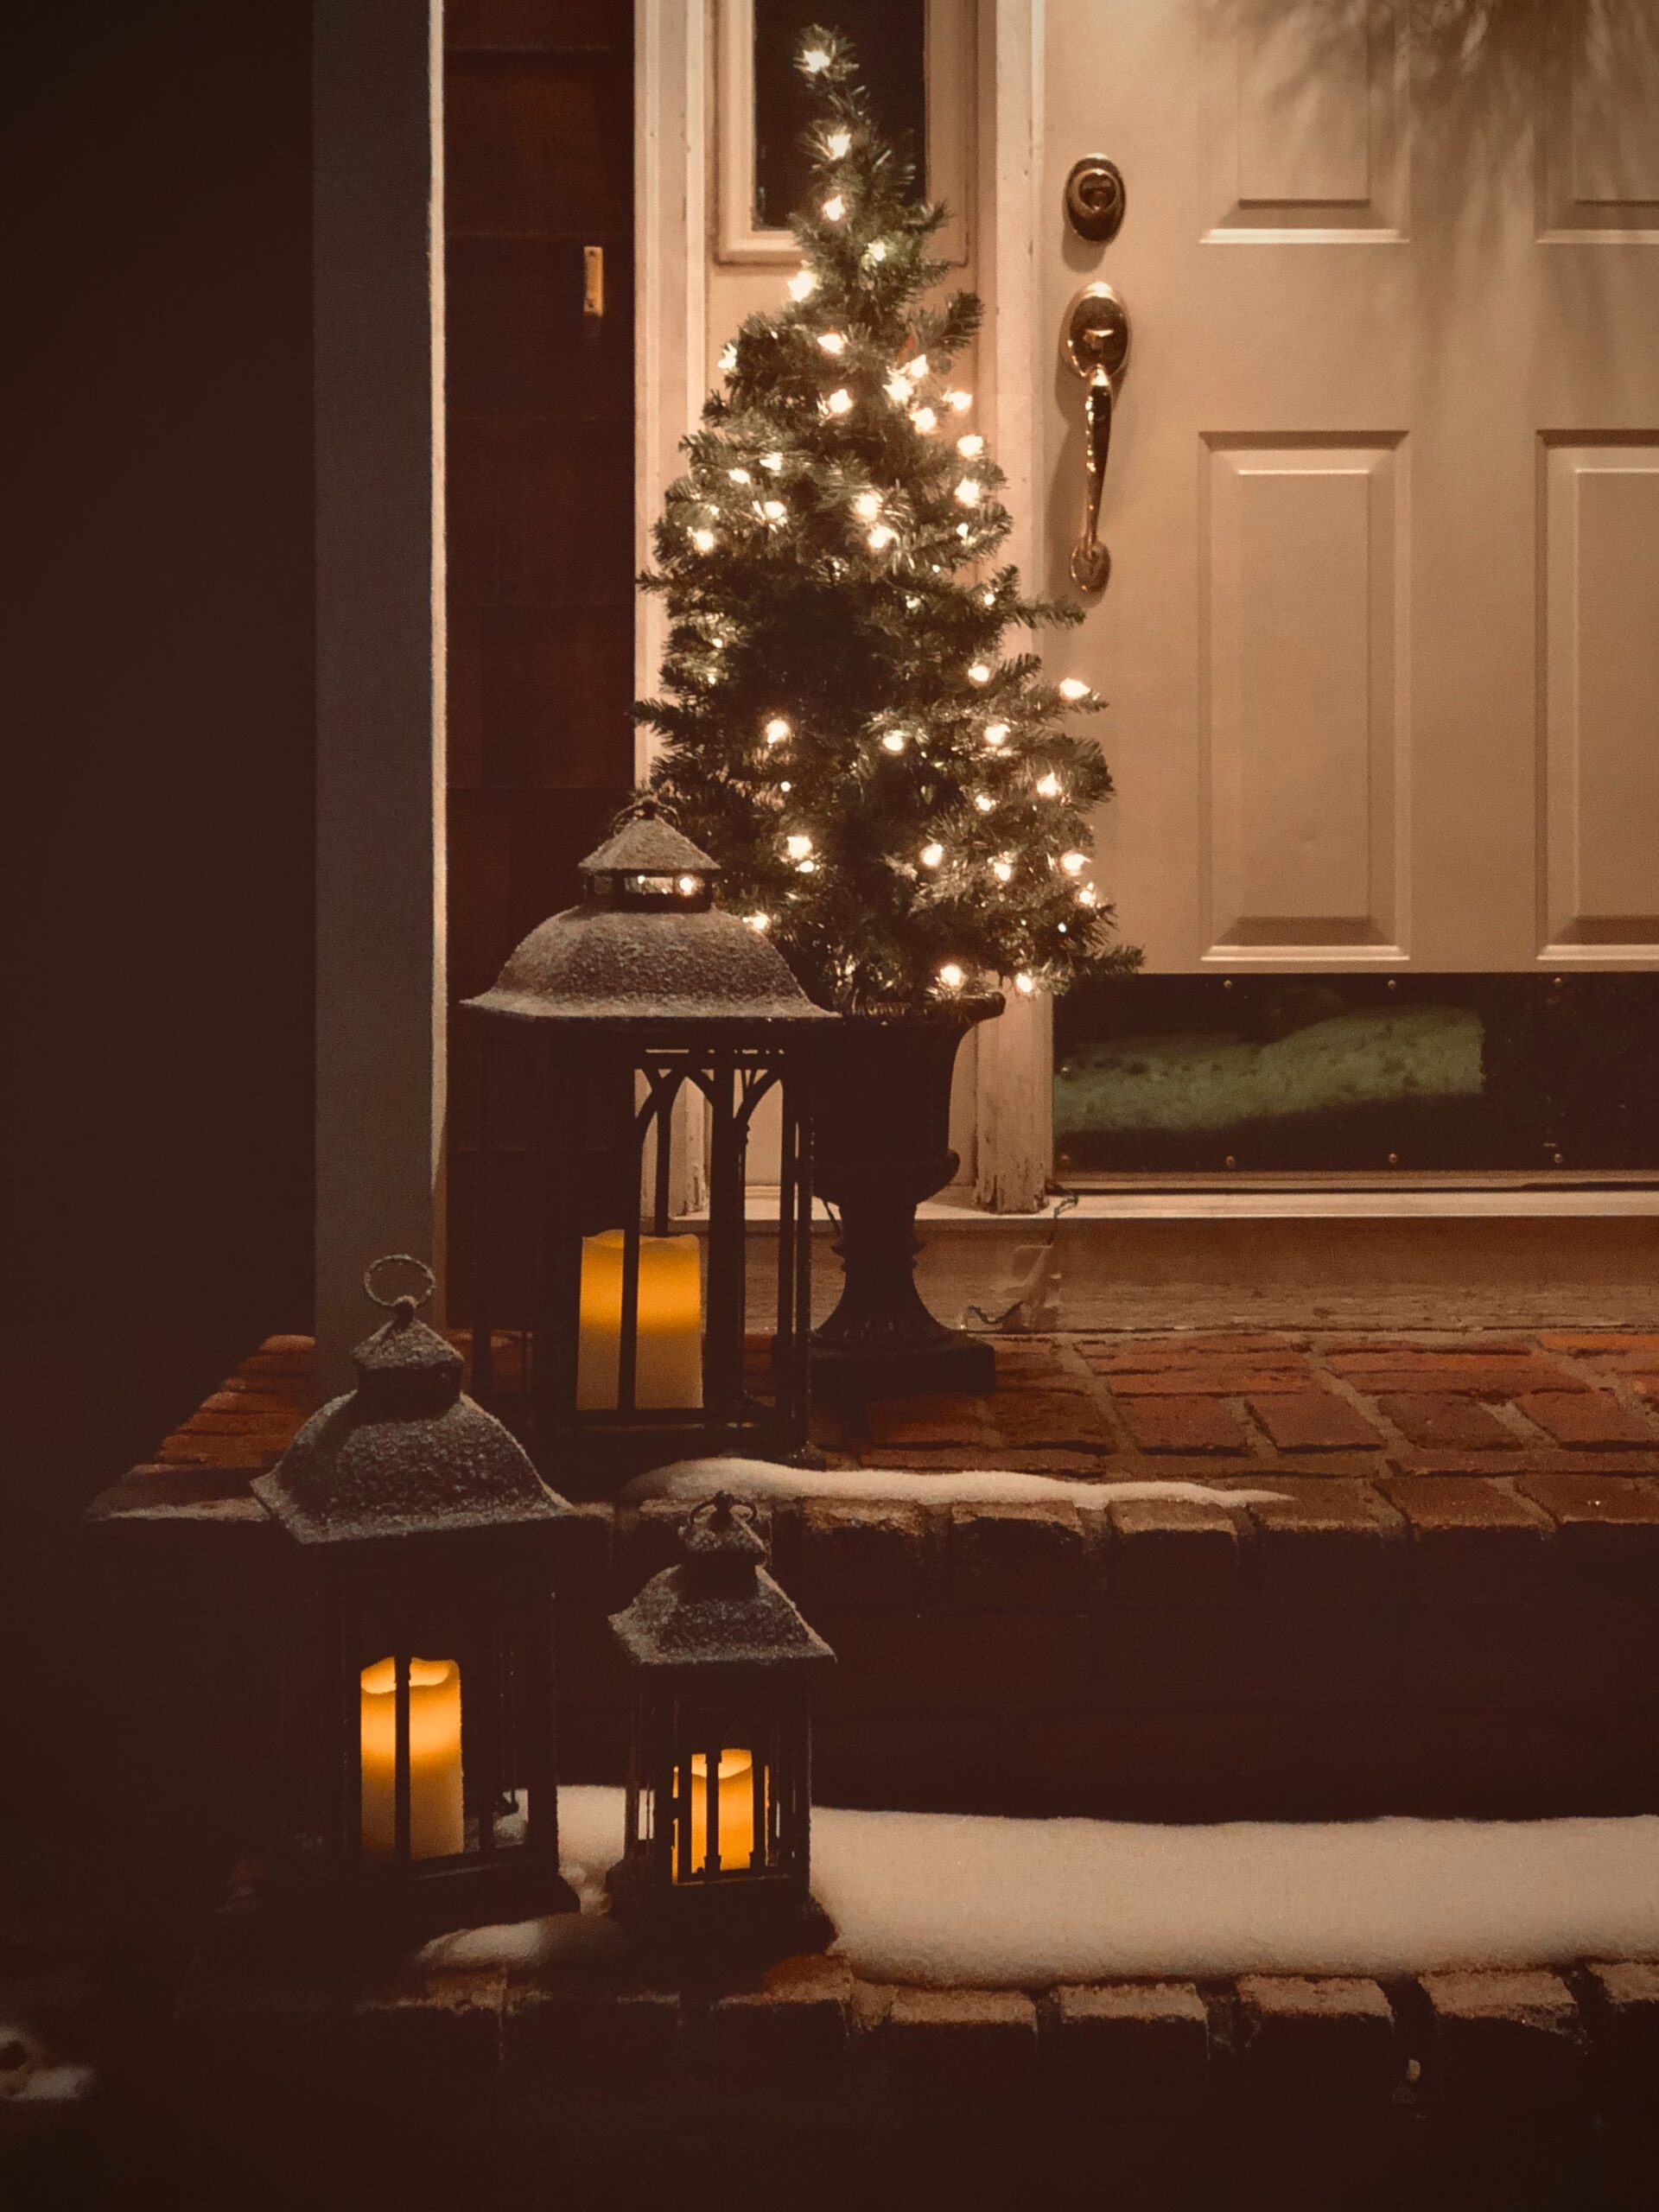 Unique Ways to Decorate Outside for the Holidays